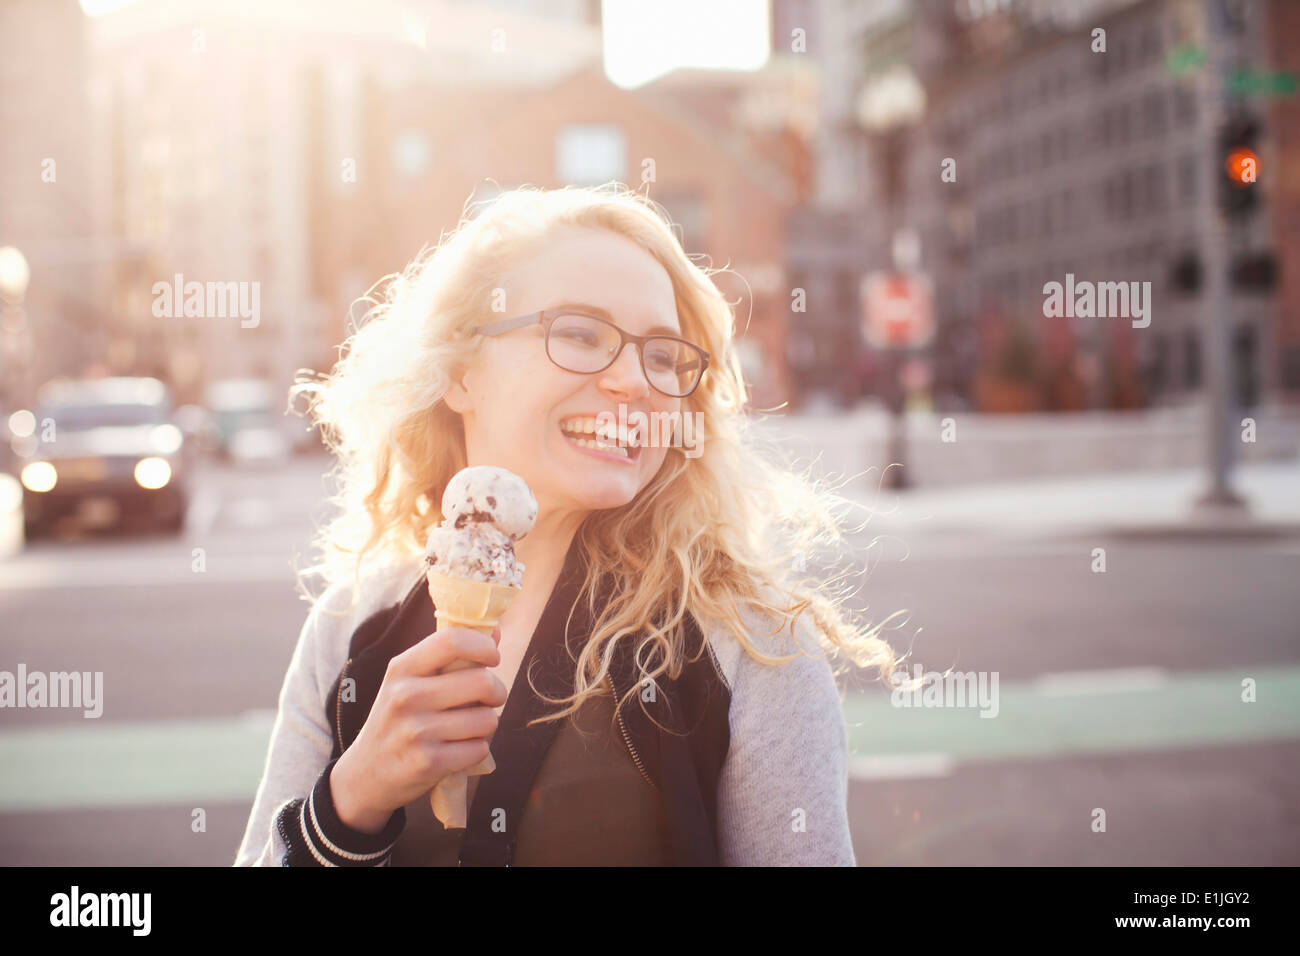 Young woman eating ice cream in street Stock Photo